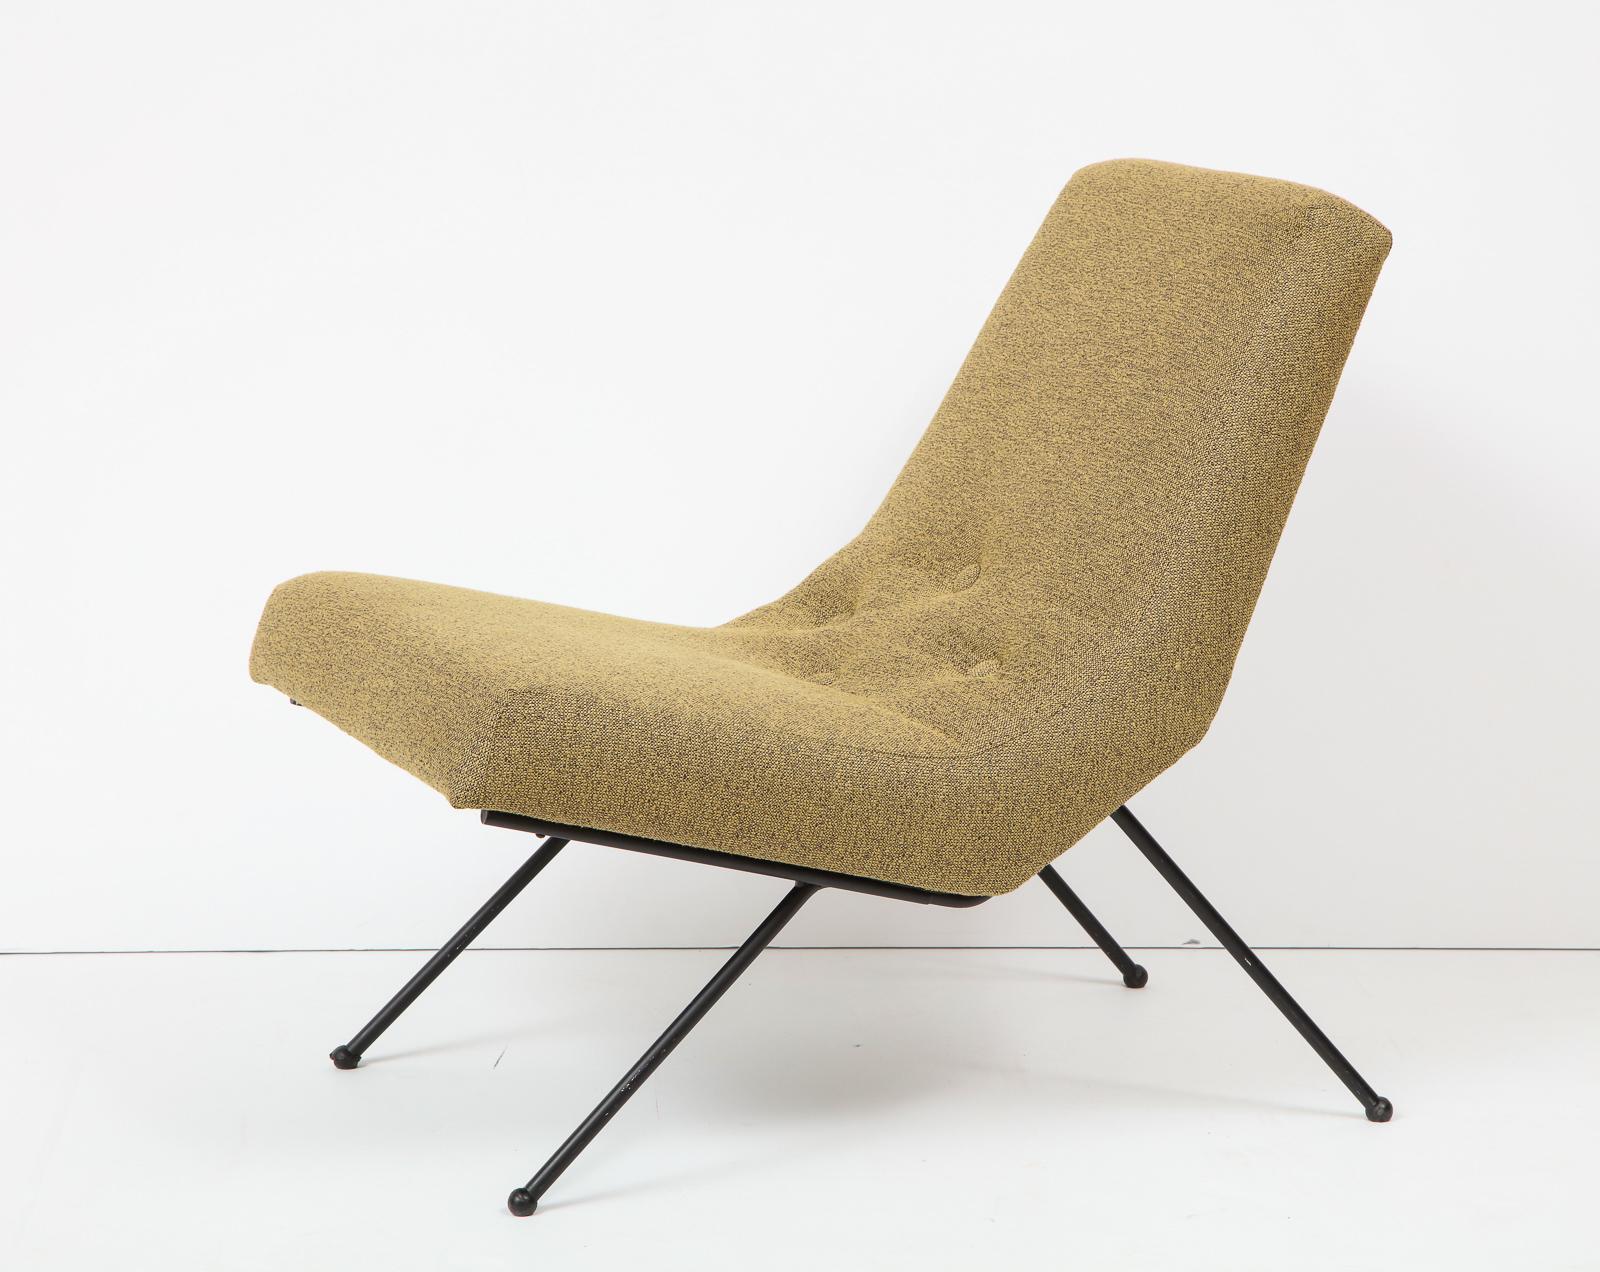 American Sculptural Adrian Pearsall Lounge Chair for Craft Associates